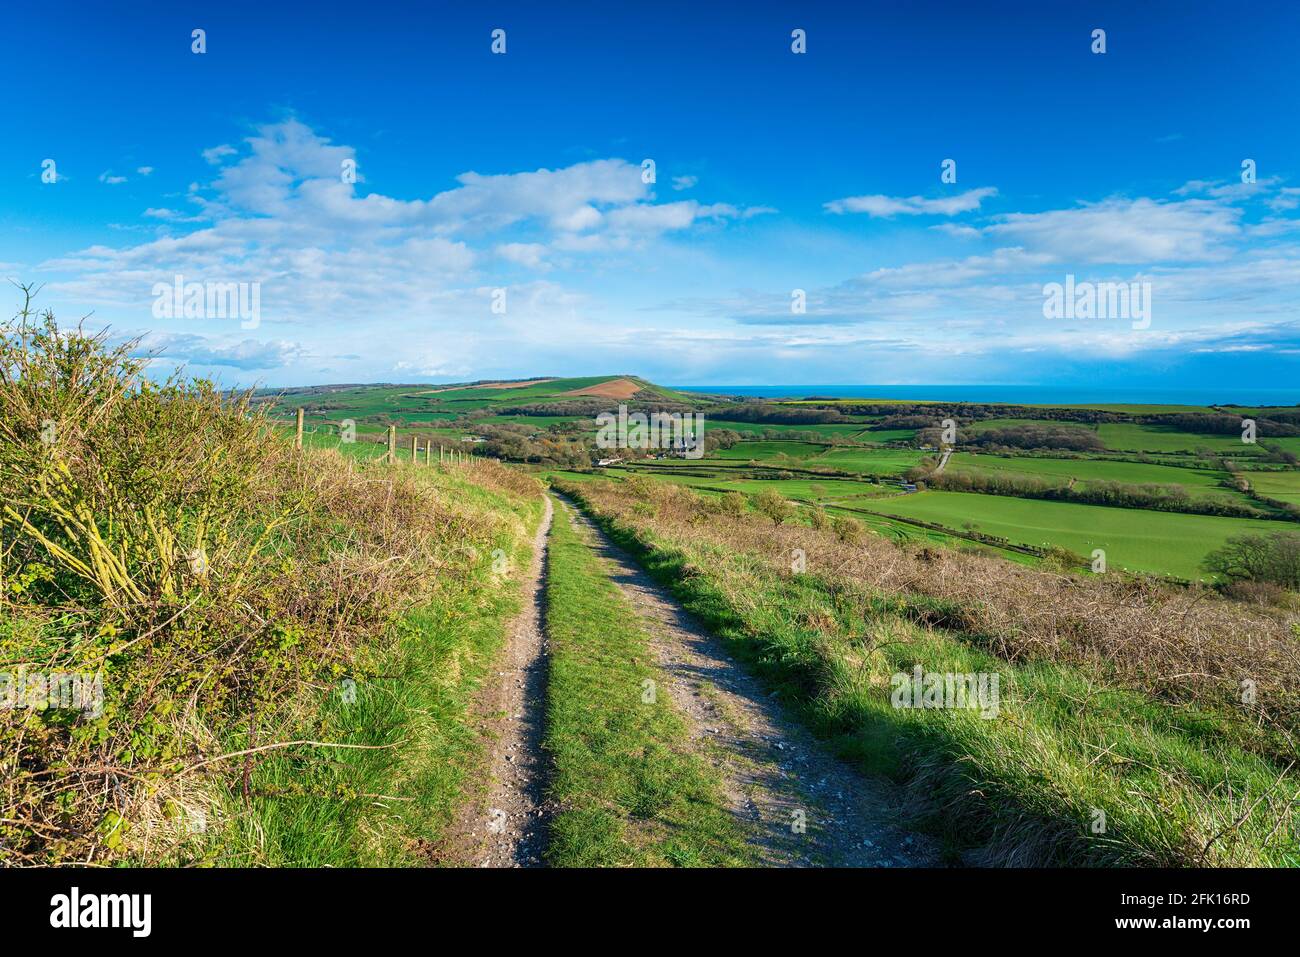 Looking out over the Purbeck Hills to the sea from the top of Grange Hill near Creech on the Dorset coast Stock Photo